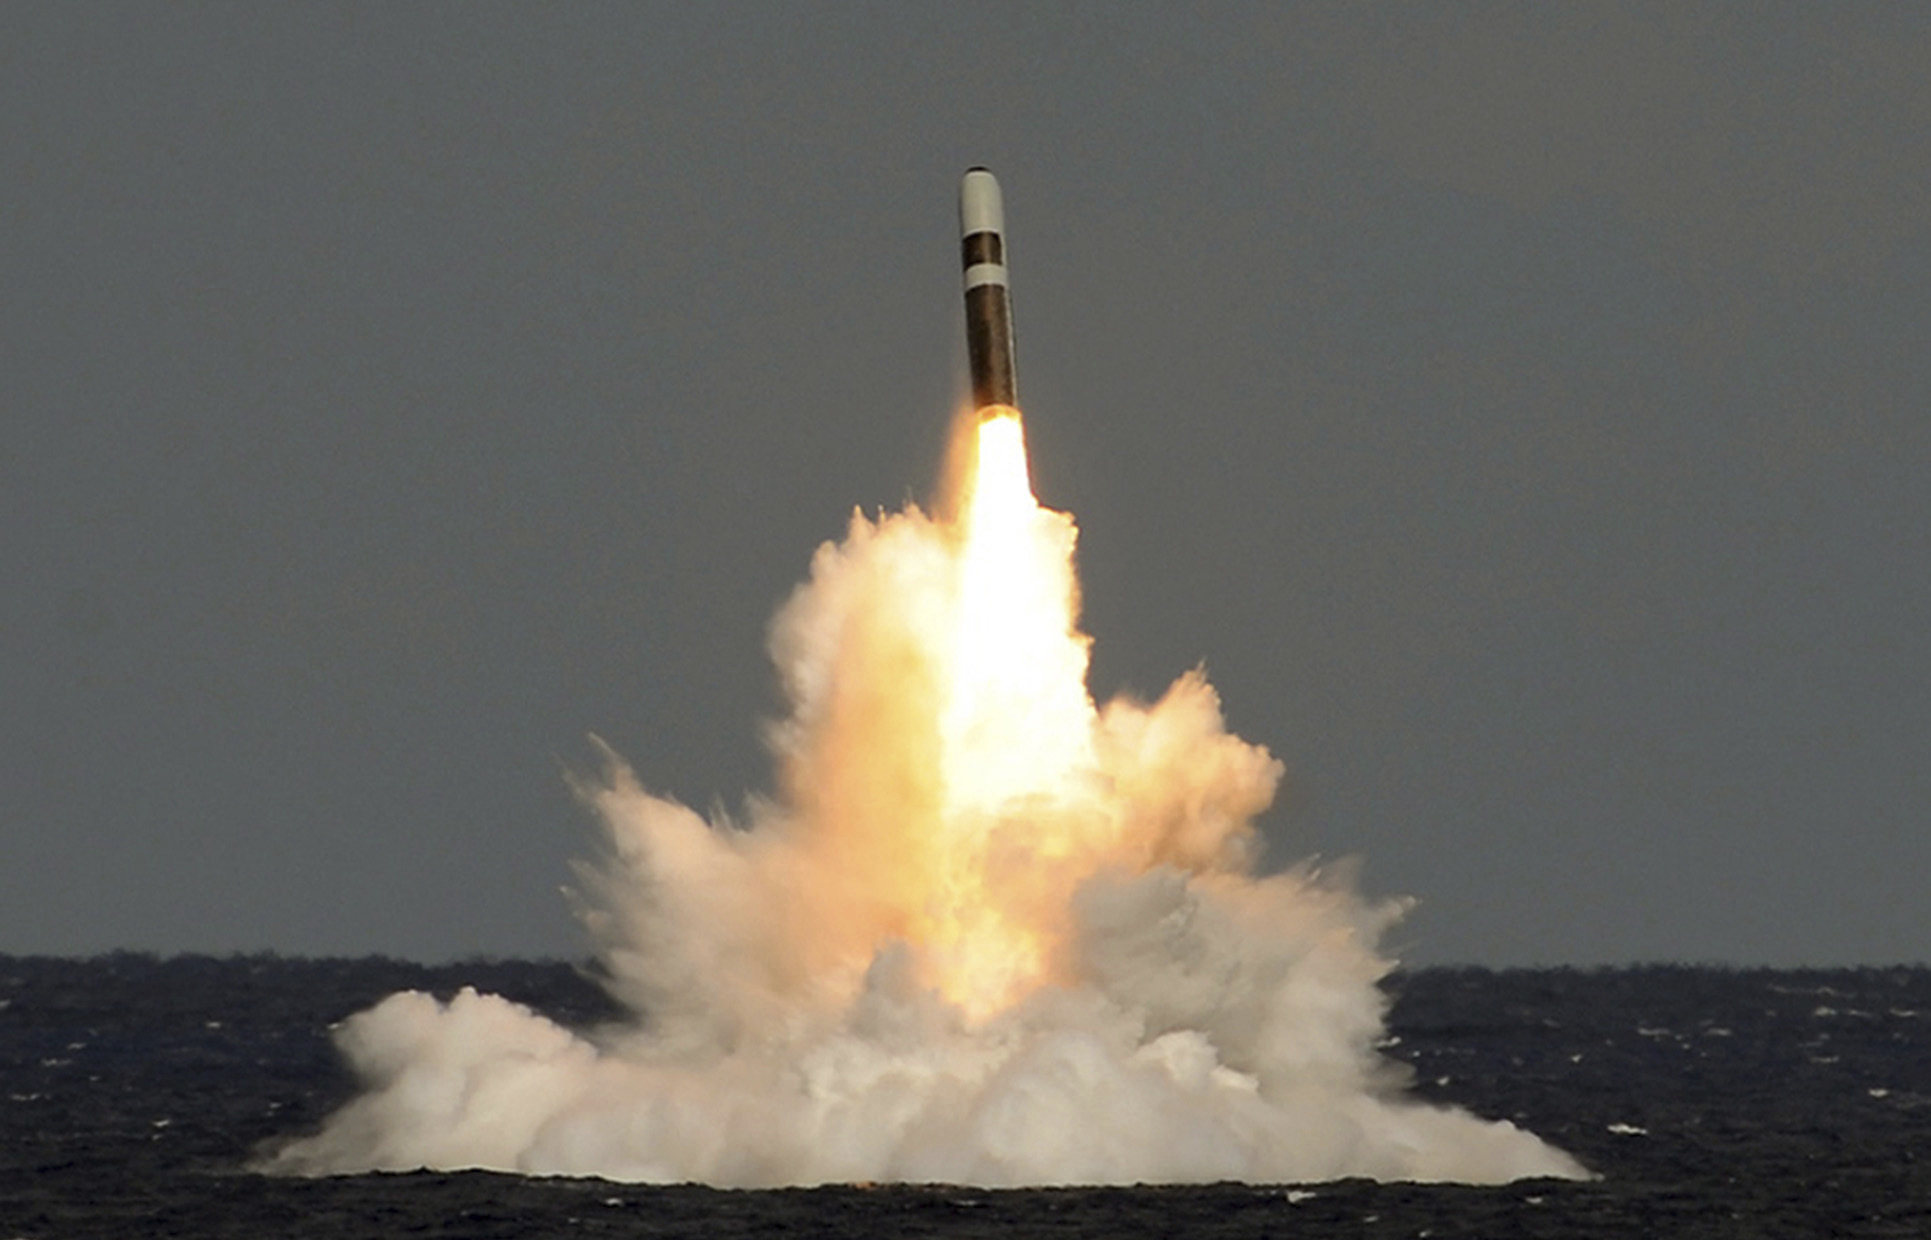 A video grab released on Wednesday shows an unarmed missile launched from the HMS Vigilant. Photo: UK Ministry of Defence via AP